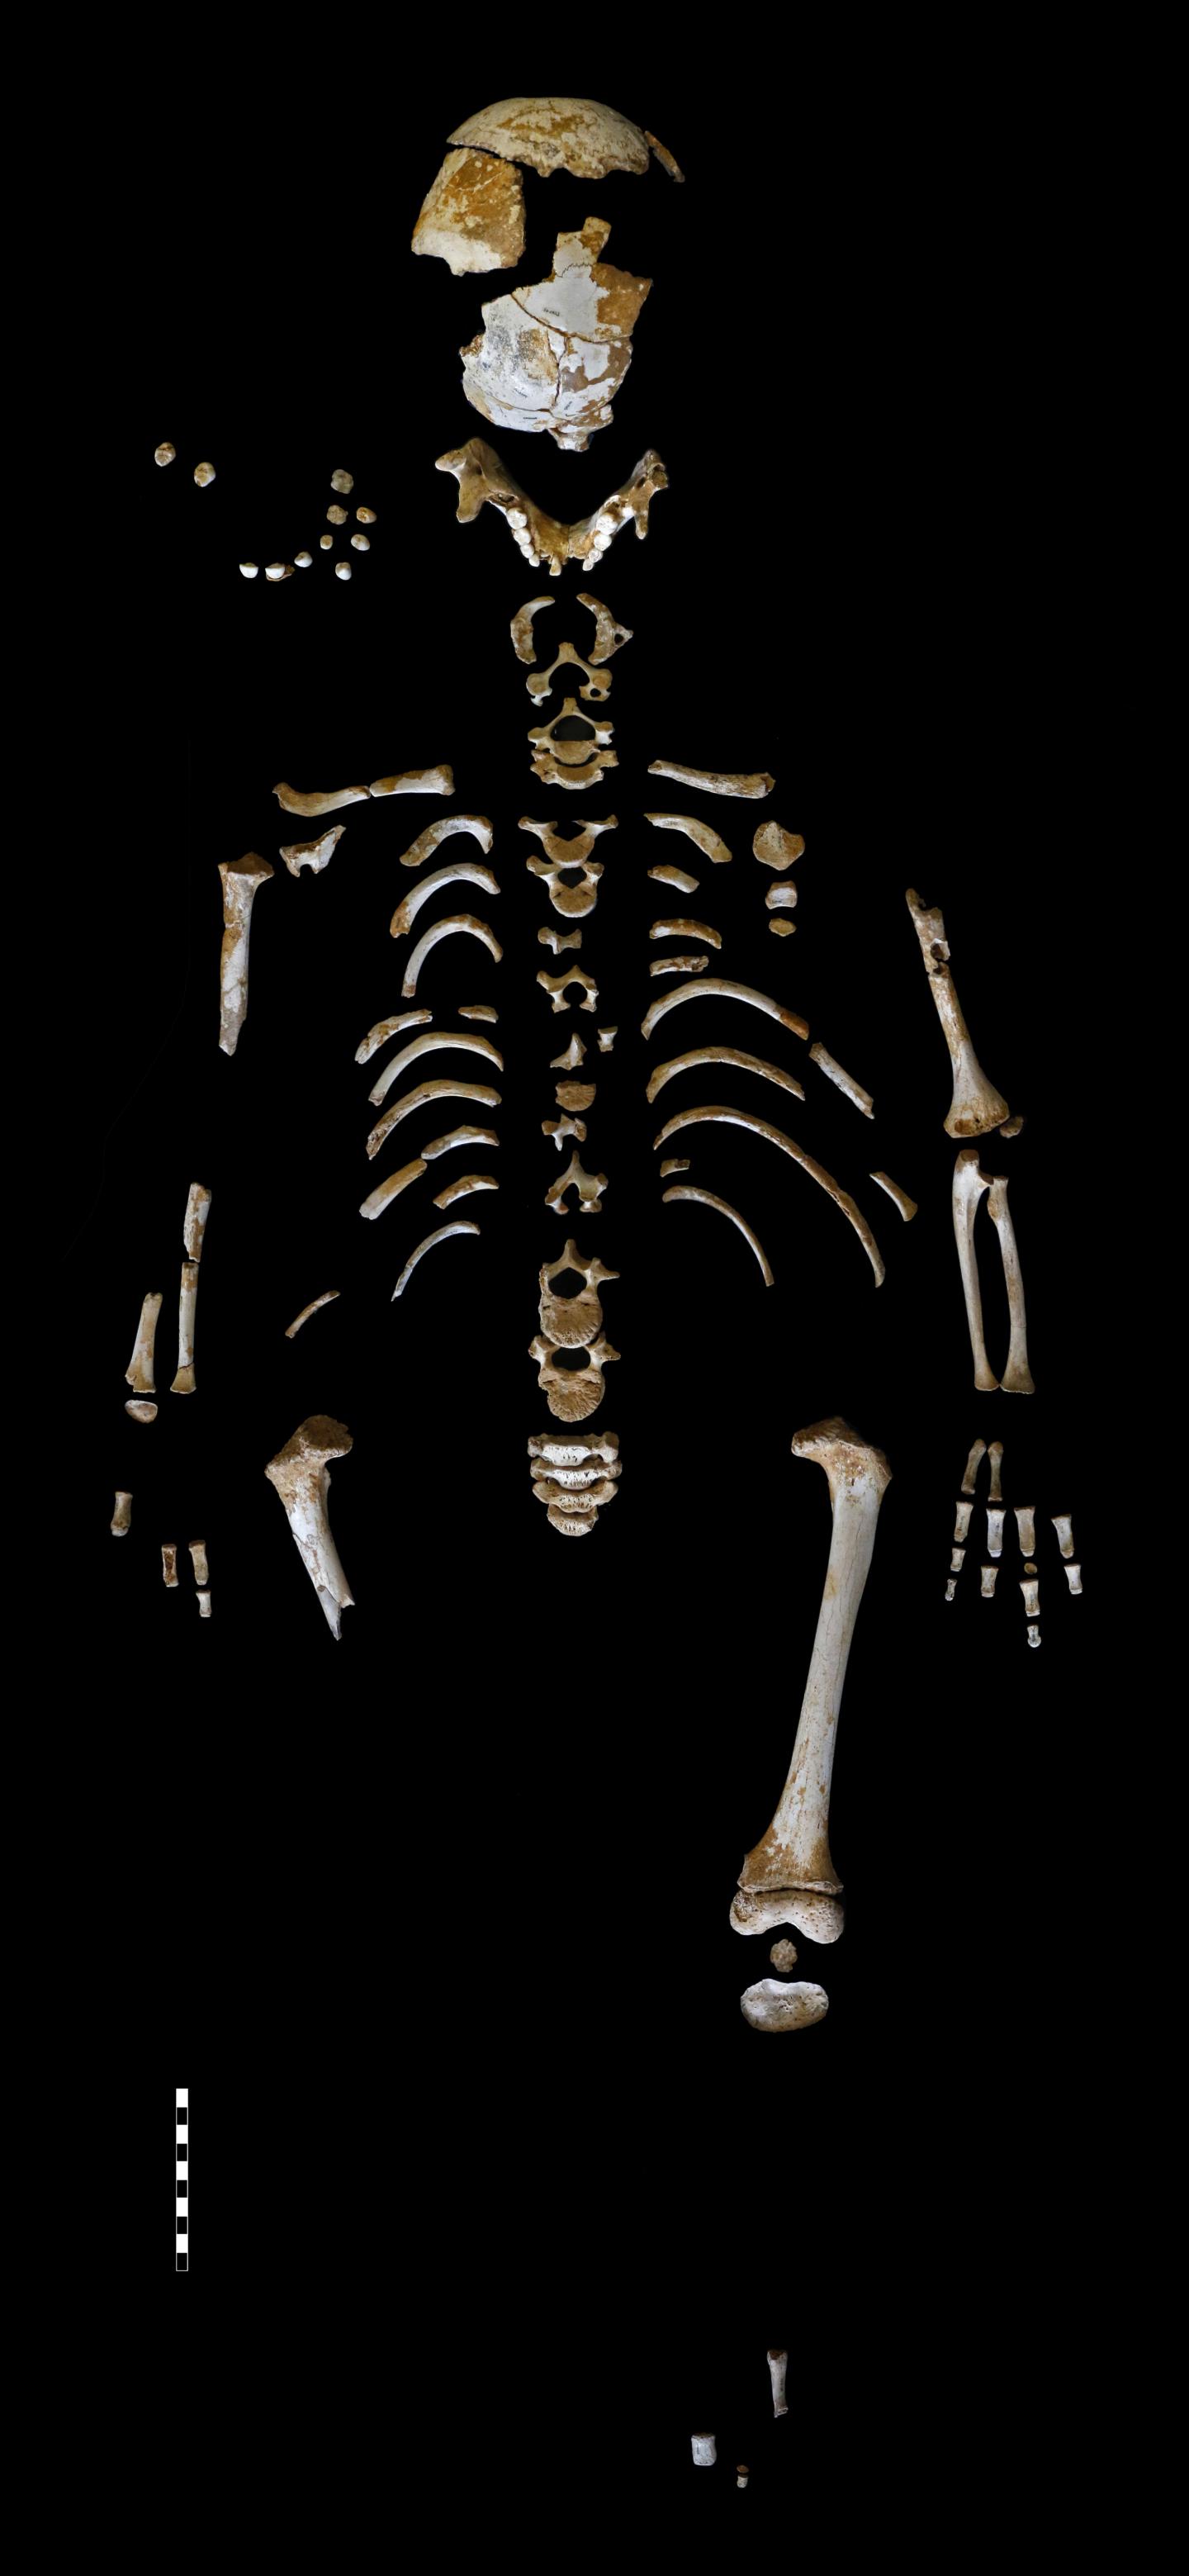 Neandertal Skeleton Reveals the Growth Pattern of Our Extinct Cousins